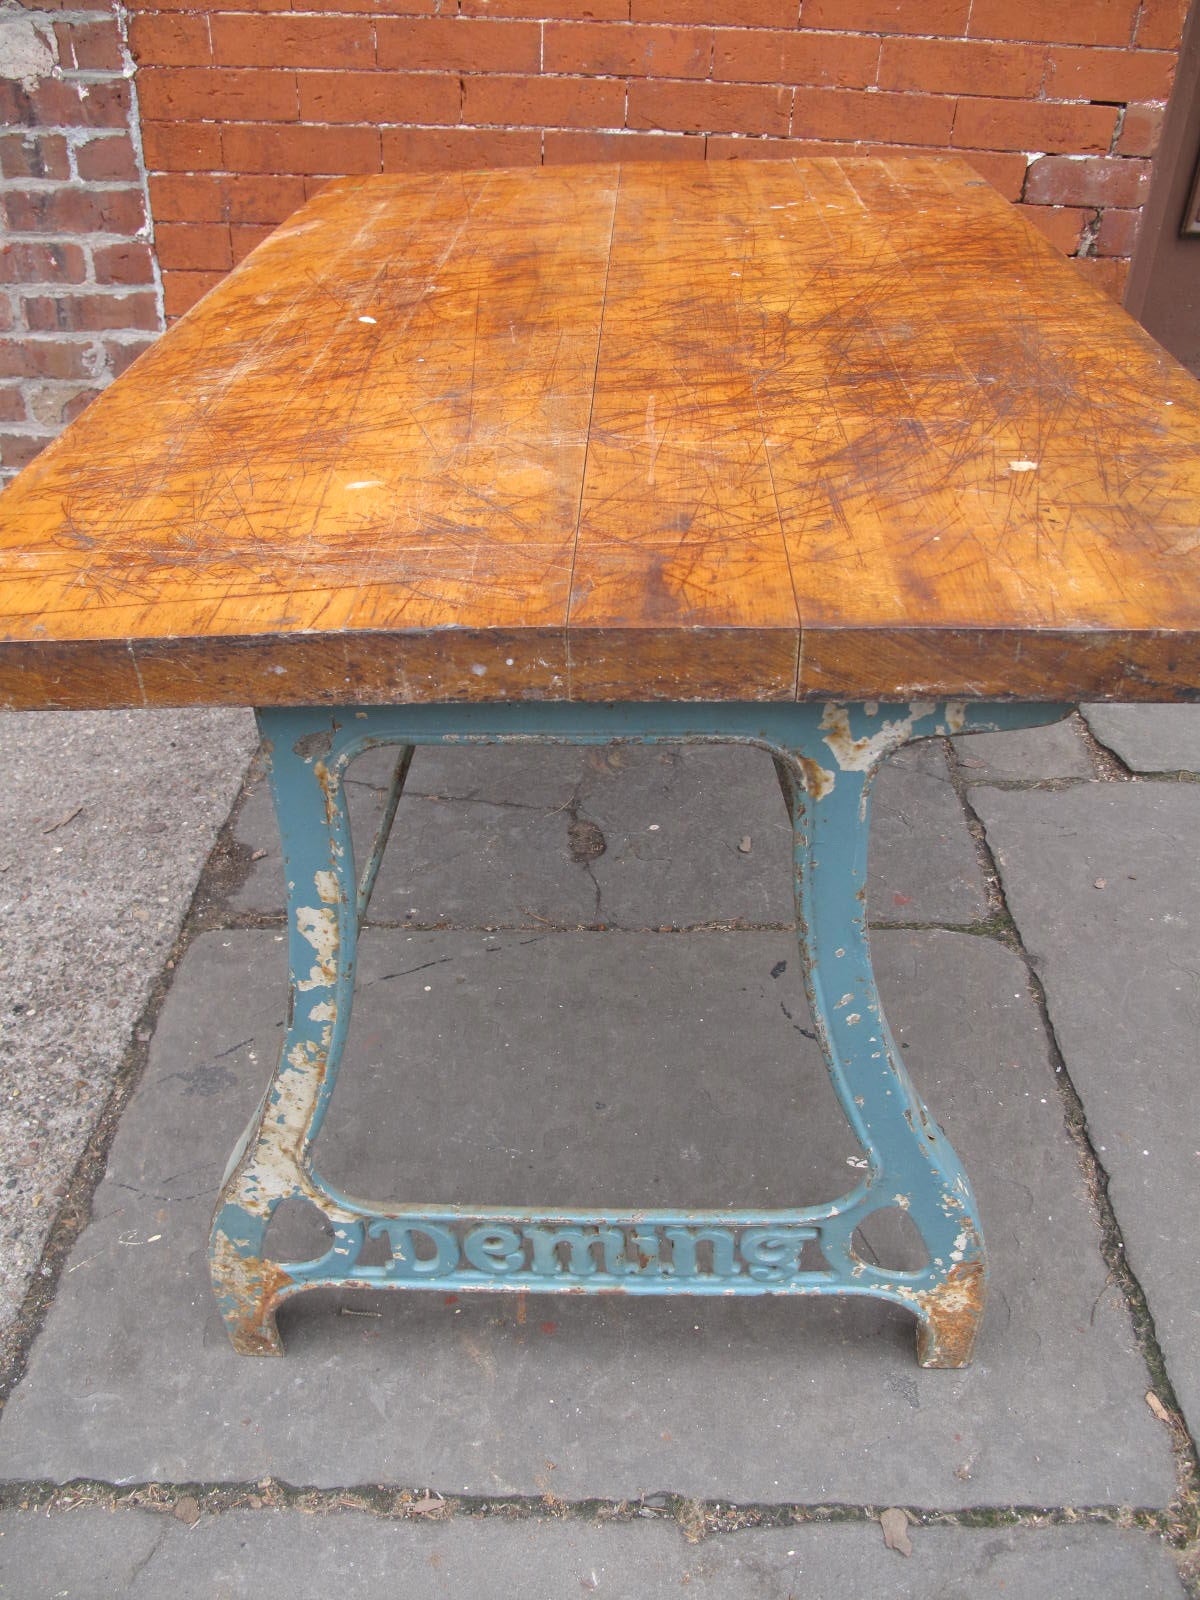 Deming Cast Iron Table In Good Condition For Sale In Brooklyn, NY